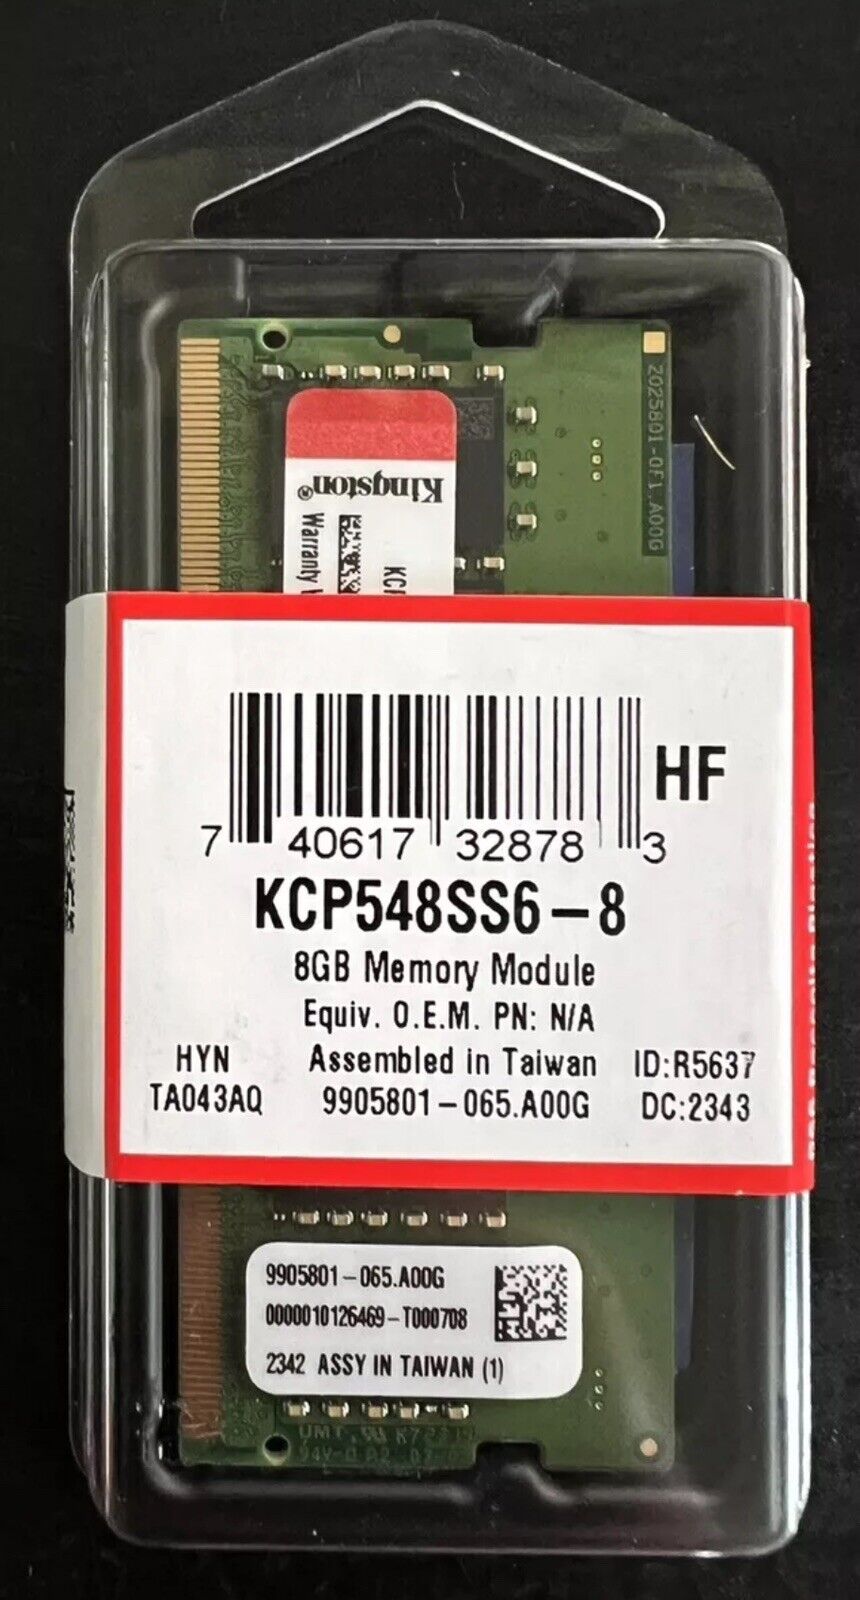 1x Kingston 8GB DDR5 RAM For Laptop KCP548SS6-8 New Sealed Original Packaging